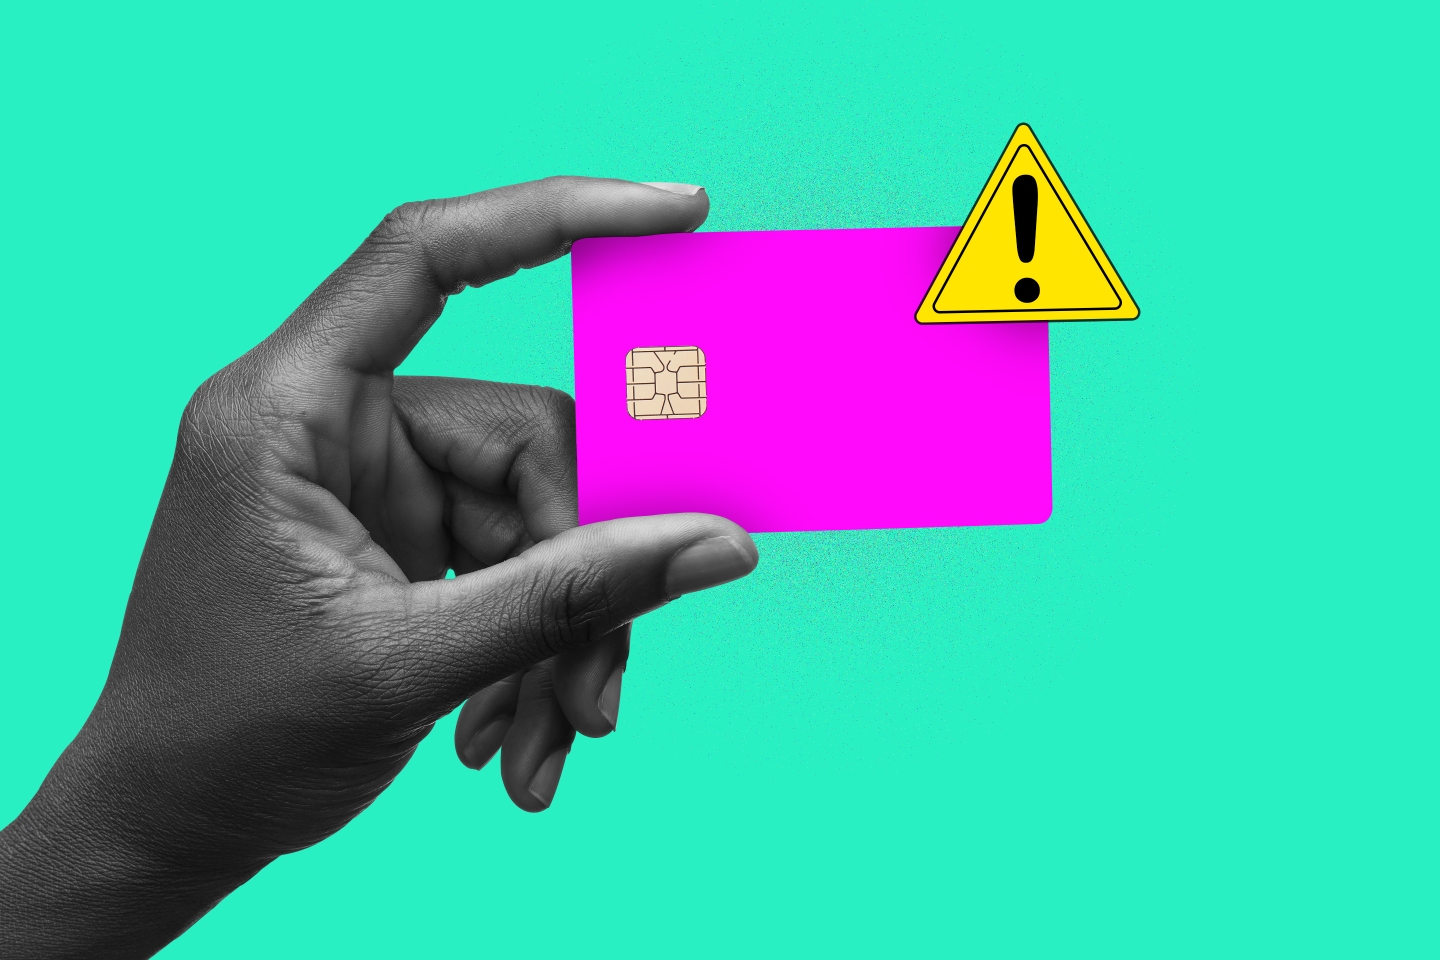 Photo illustration of a hand holding a credit card that has an "emergency" exclamation point icon in the top right corner.